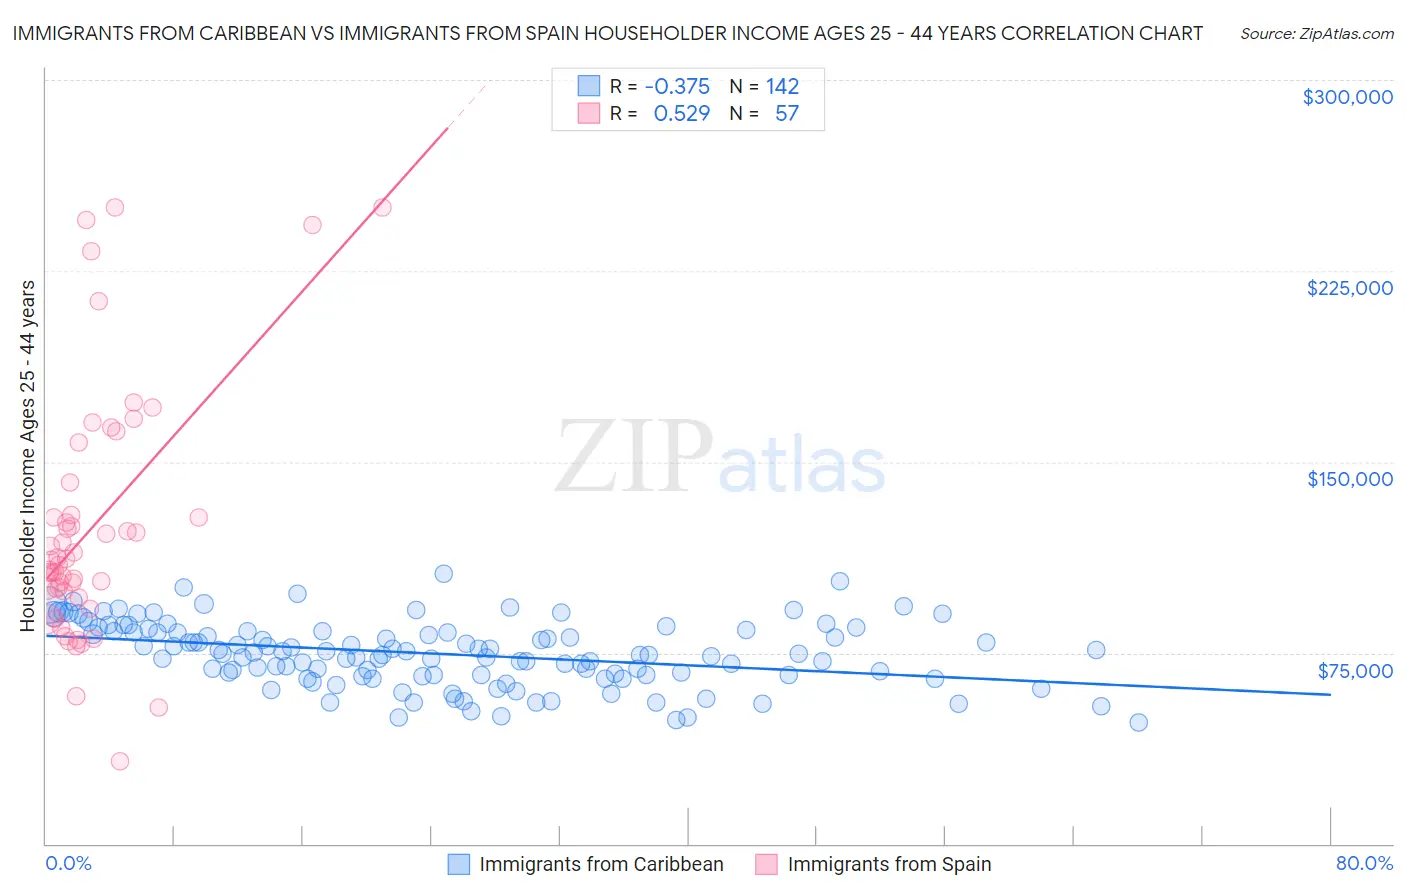 Immigrants from Caribbean vs Immigrants from Spain Householder Income Ages 25 - 44 years